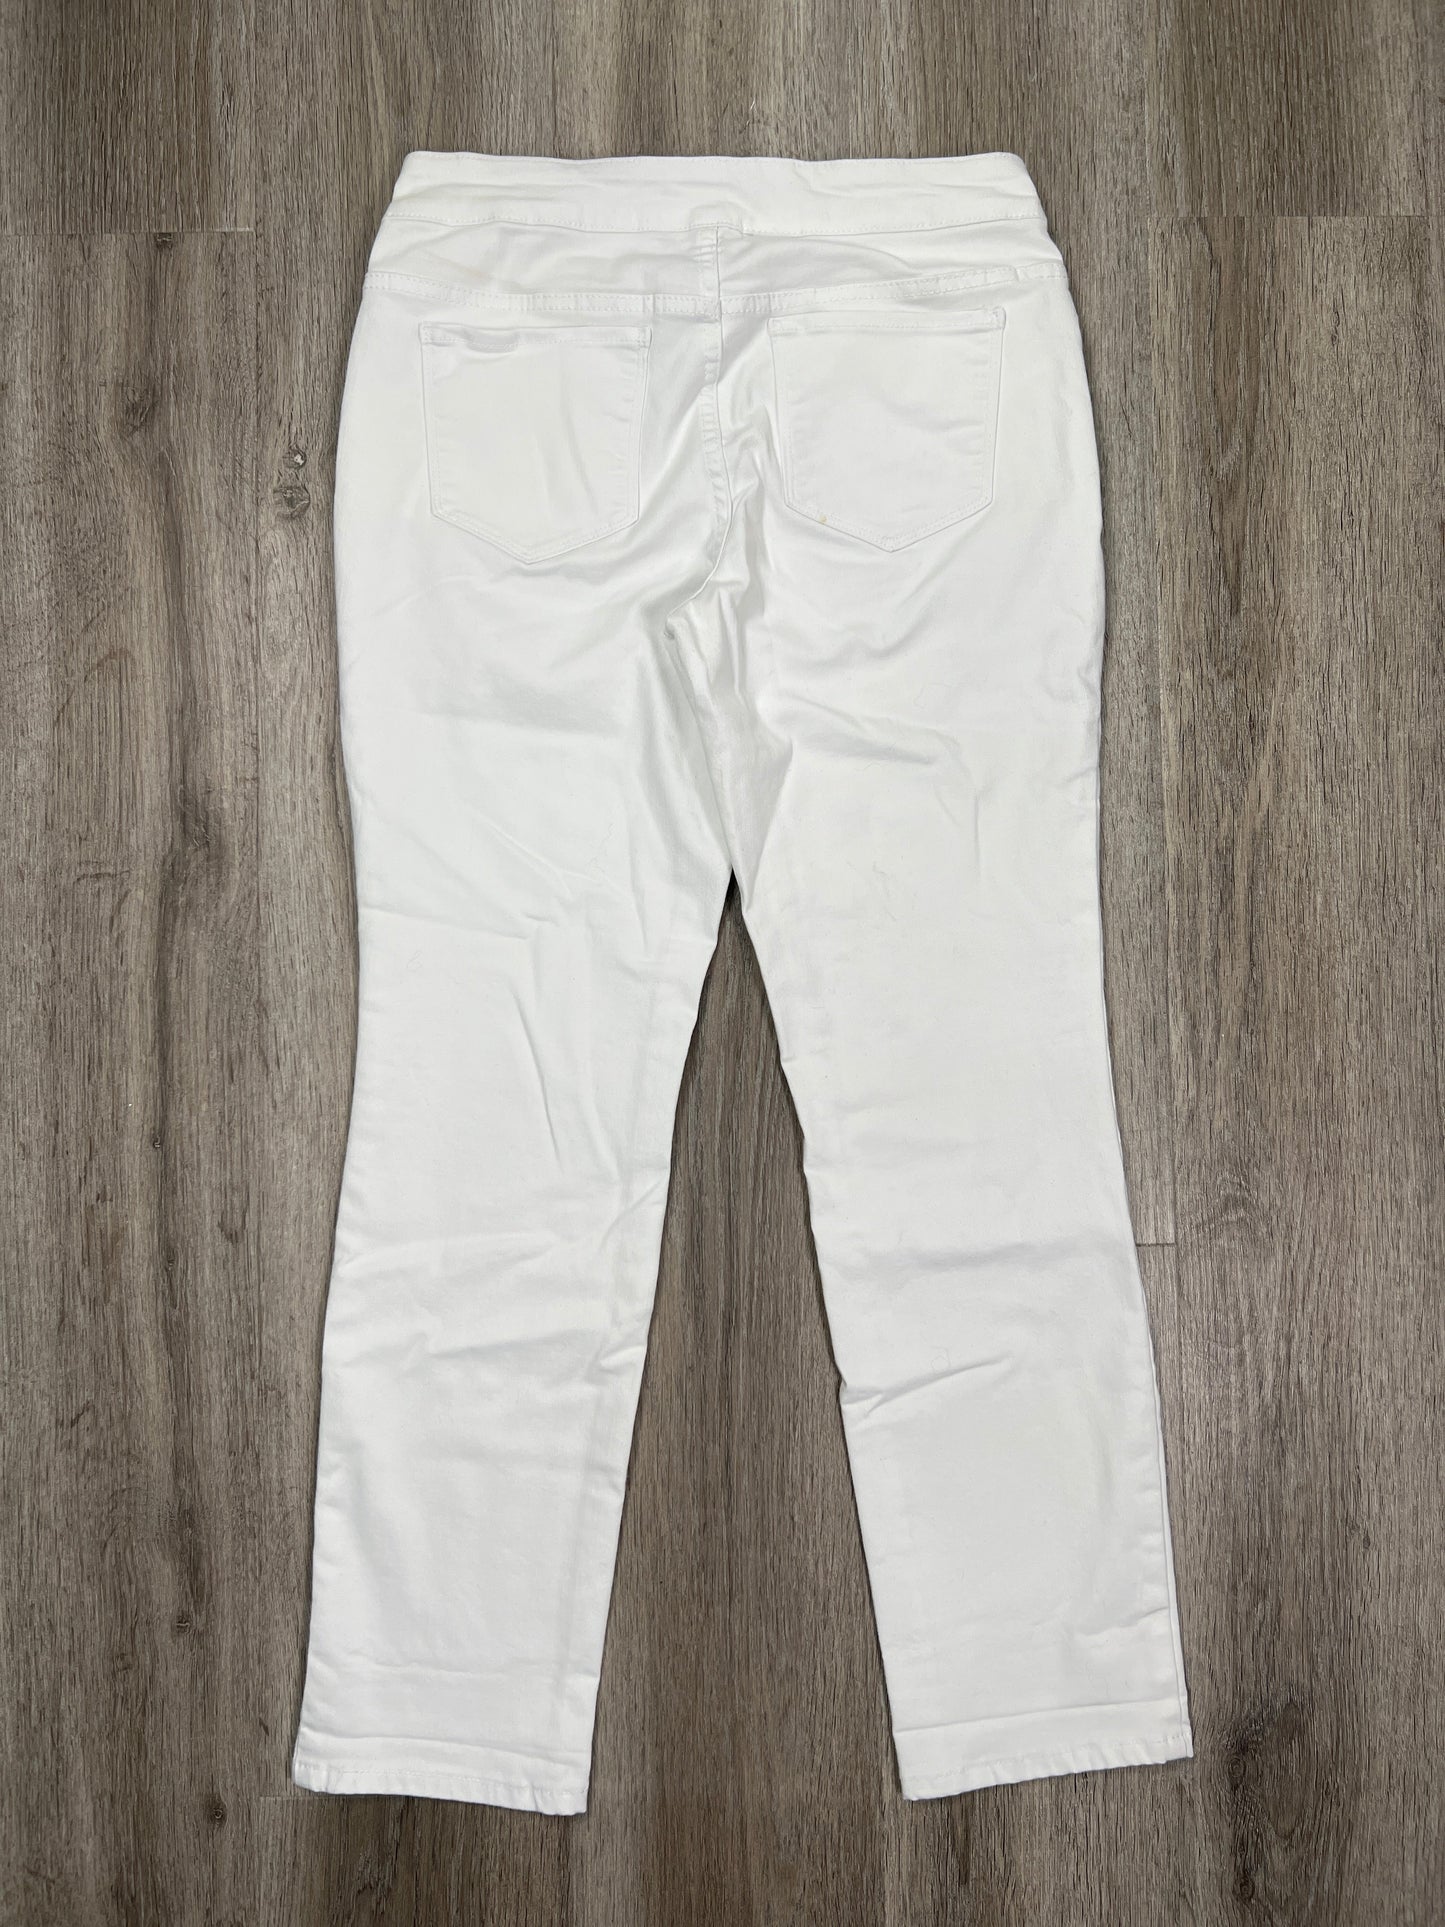 White Jeans Straight West Bound, Size 6